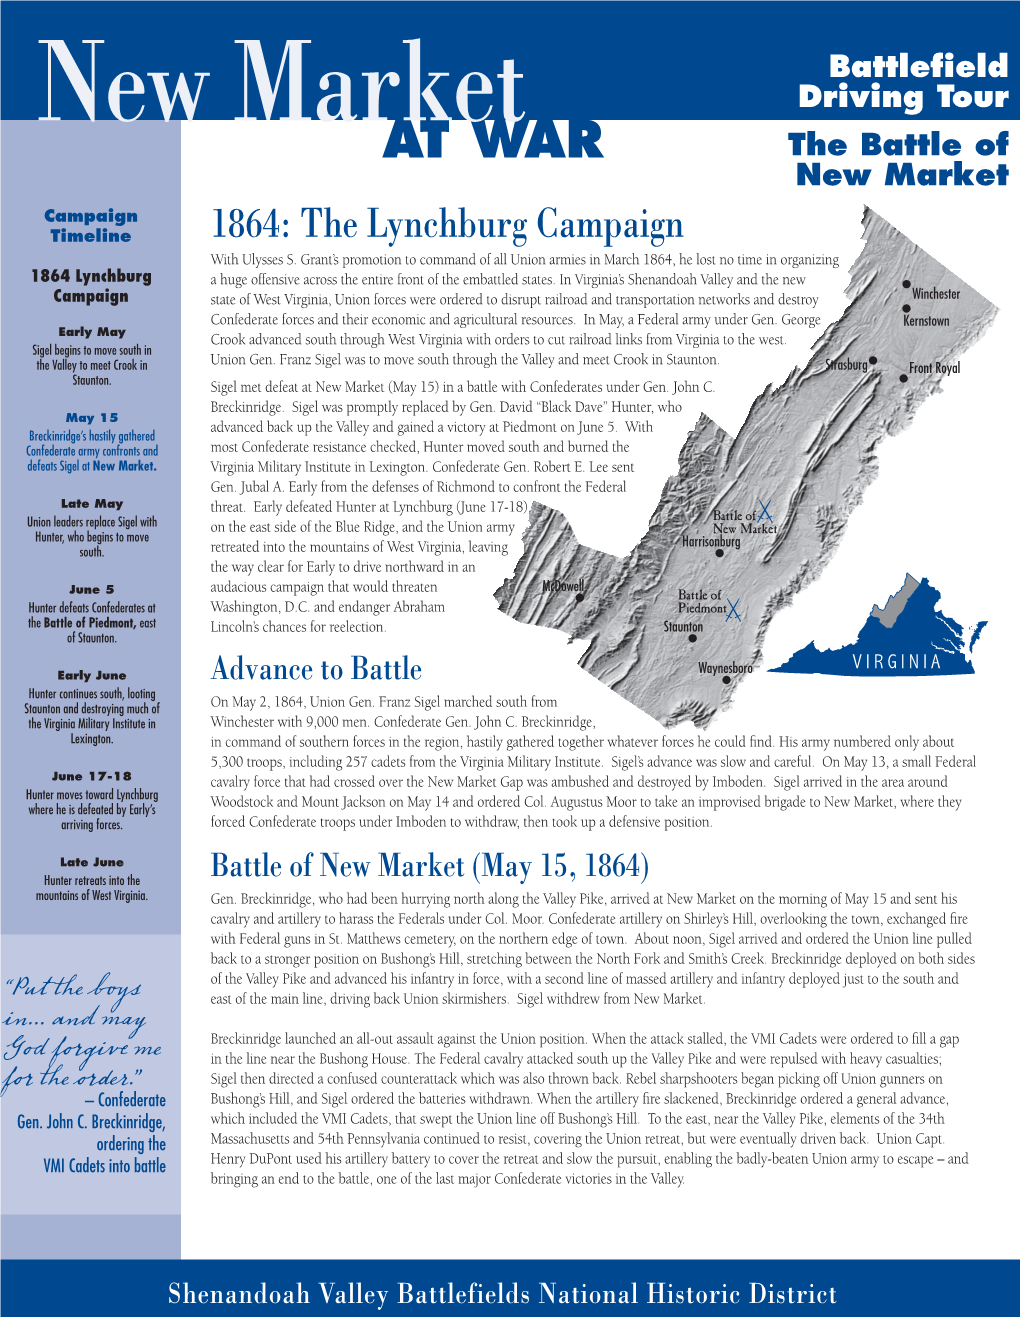 New Market Driving Tour at WAR the Battle of New Market Campaign Timeline 1864: the Lynchburg Campaign with Ulysses S